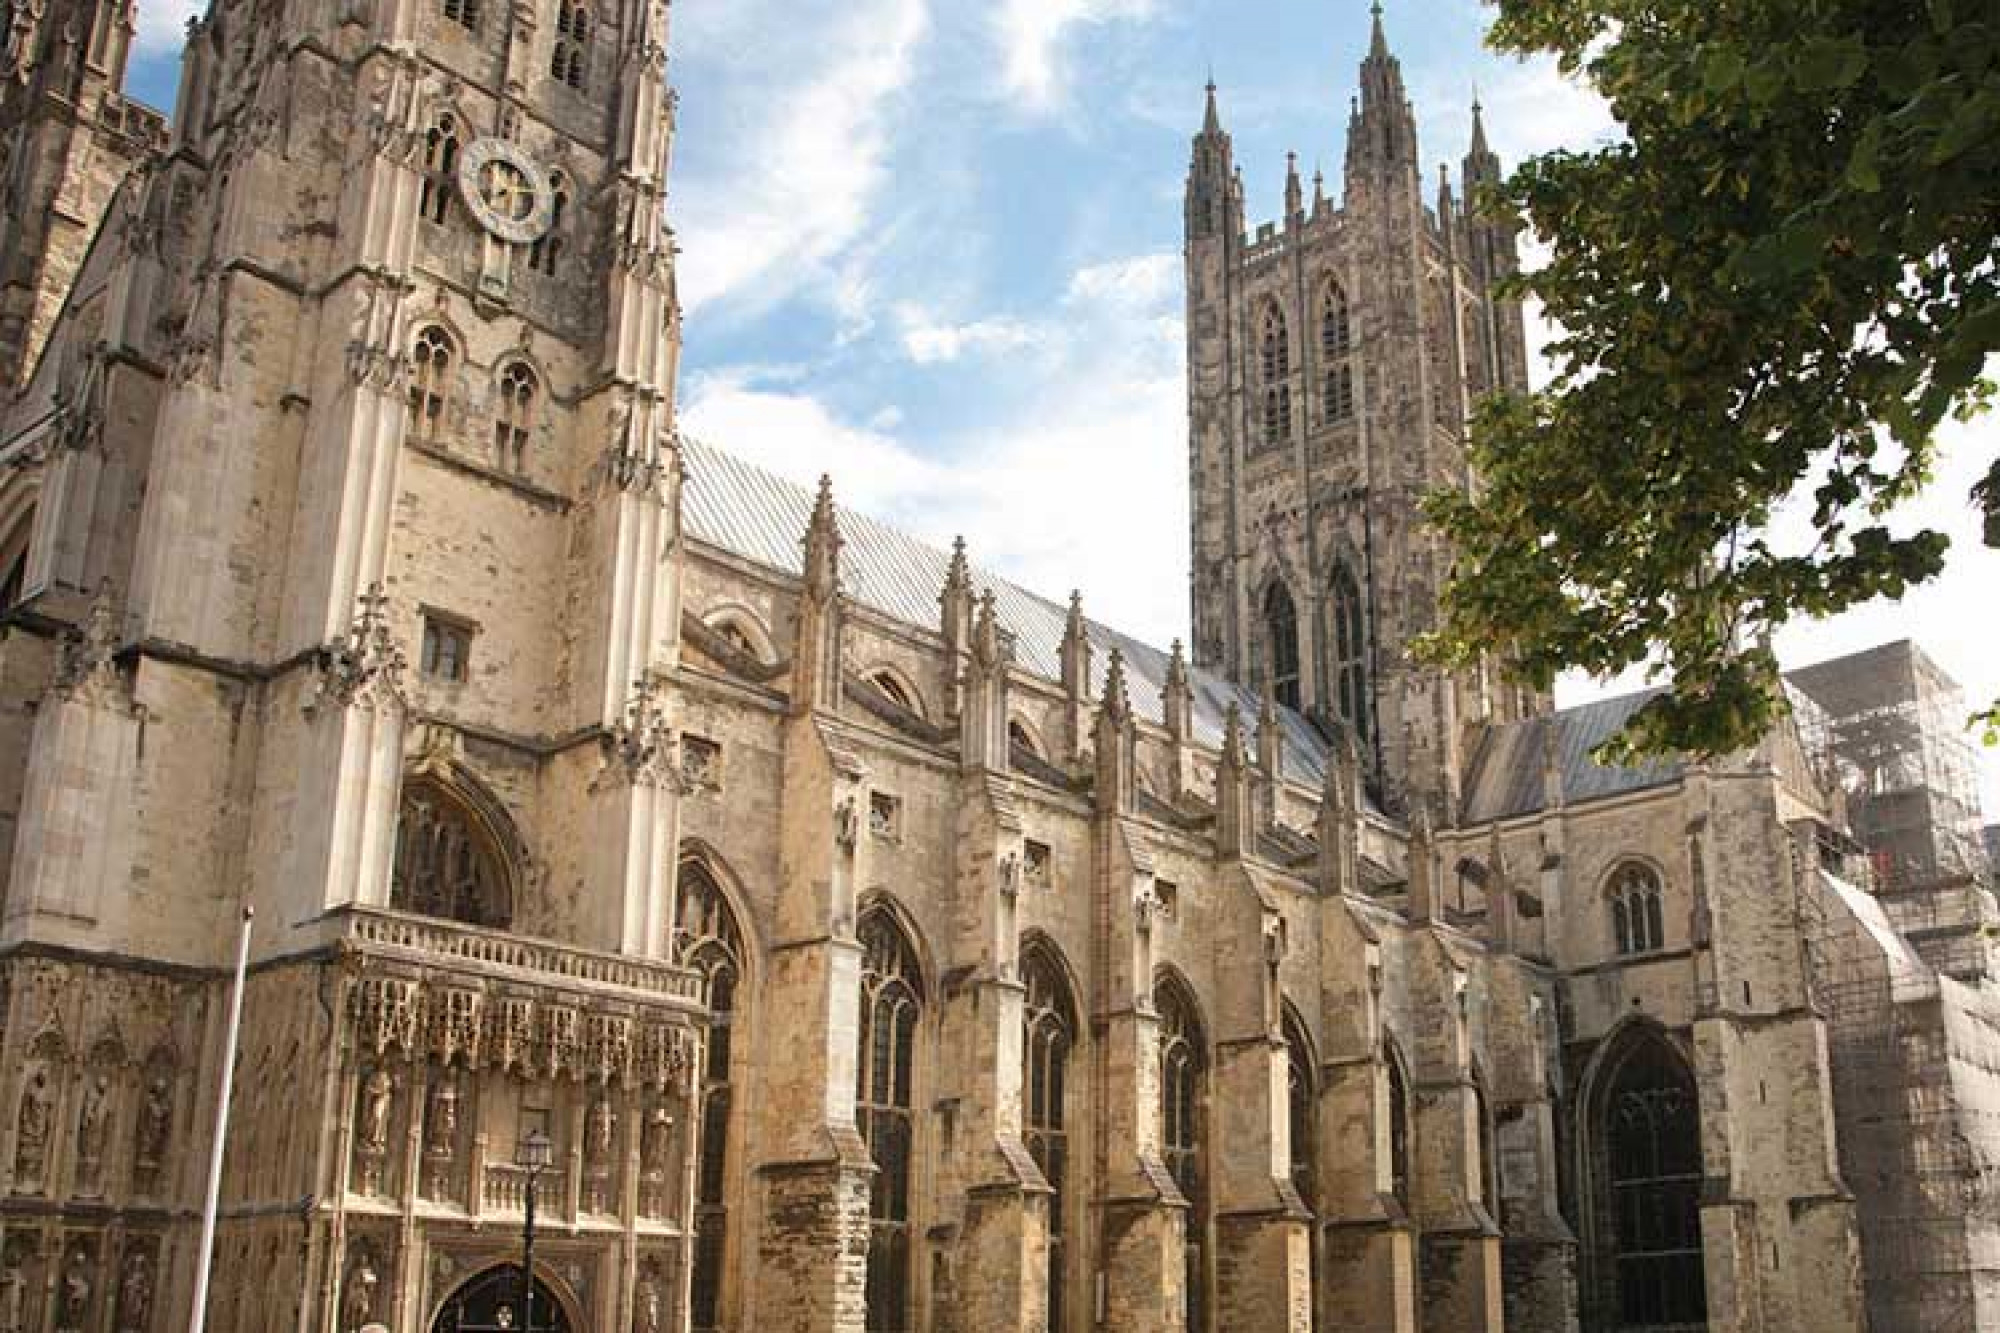 Canterbury cathedral